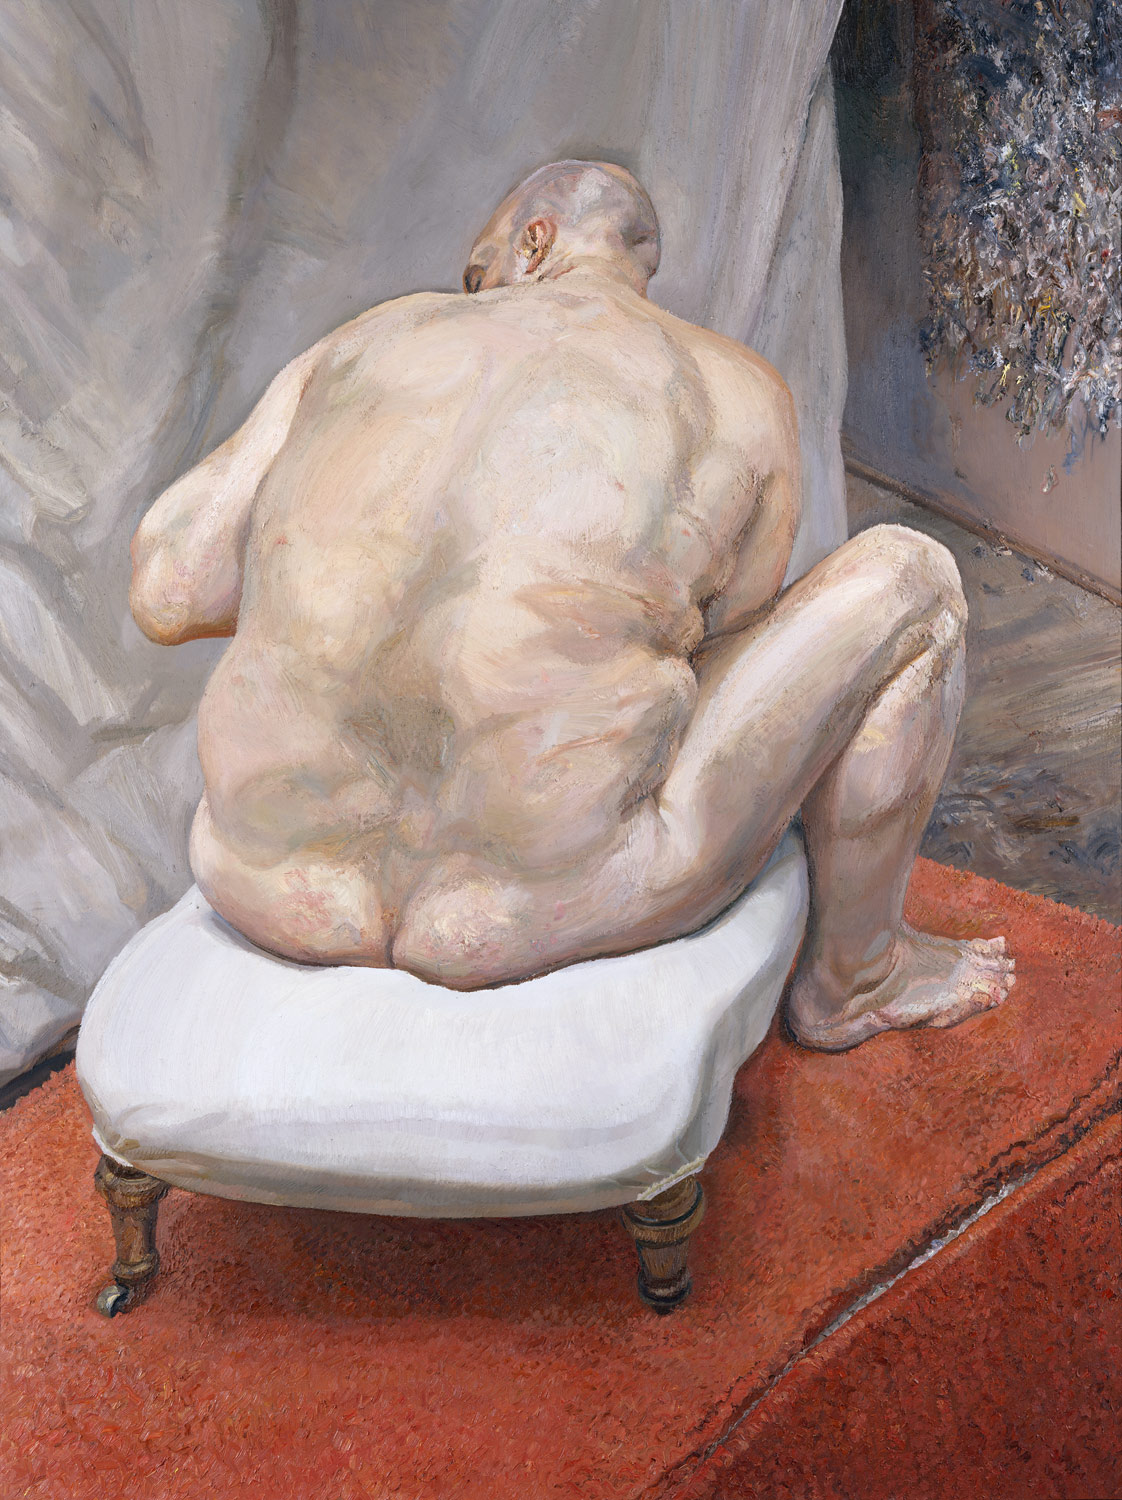 Naked Man, Back View